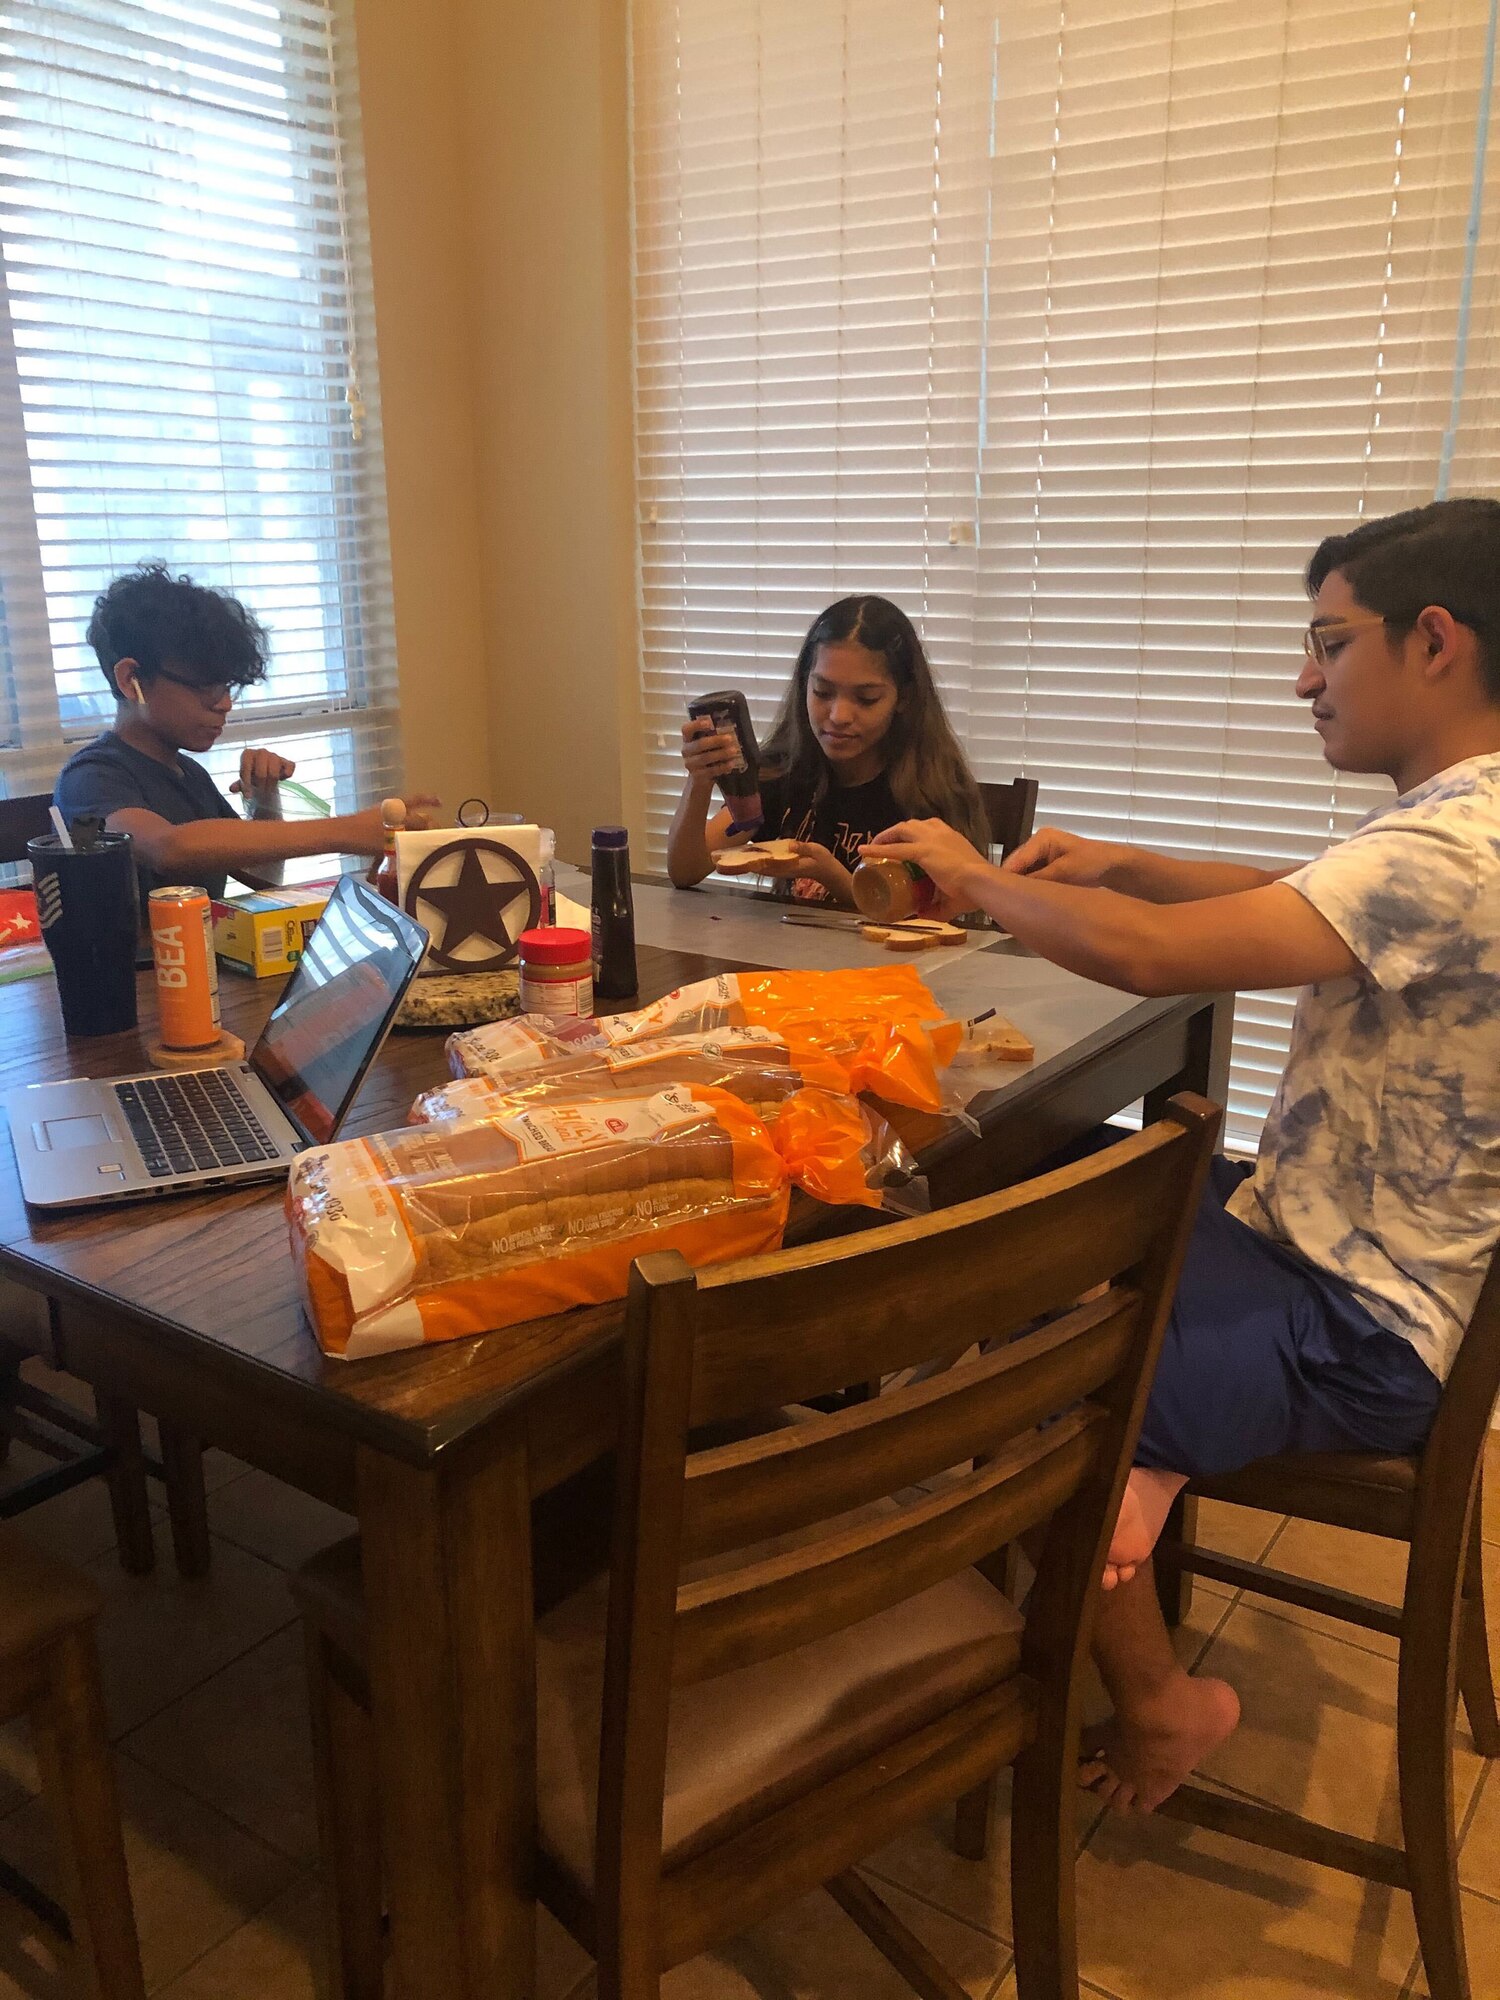 The Lamar family pitches in to make peanut butter and jelly sandwiches for those in need in the local area. Reserve Citizen Airmen from the 23rd Intelligence Squadron donated more than 1,000 peanut butter and jelly sandwiches in the last month to local San Antonians in need.